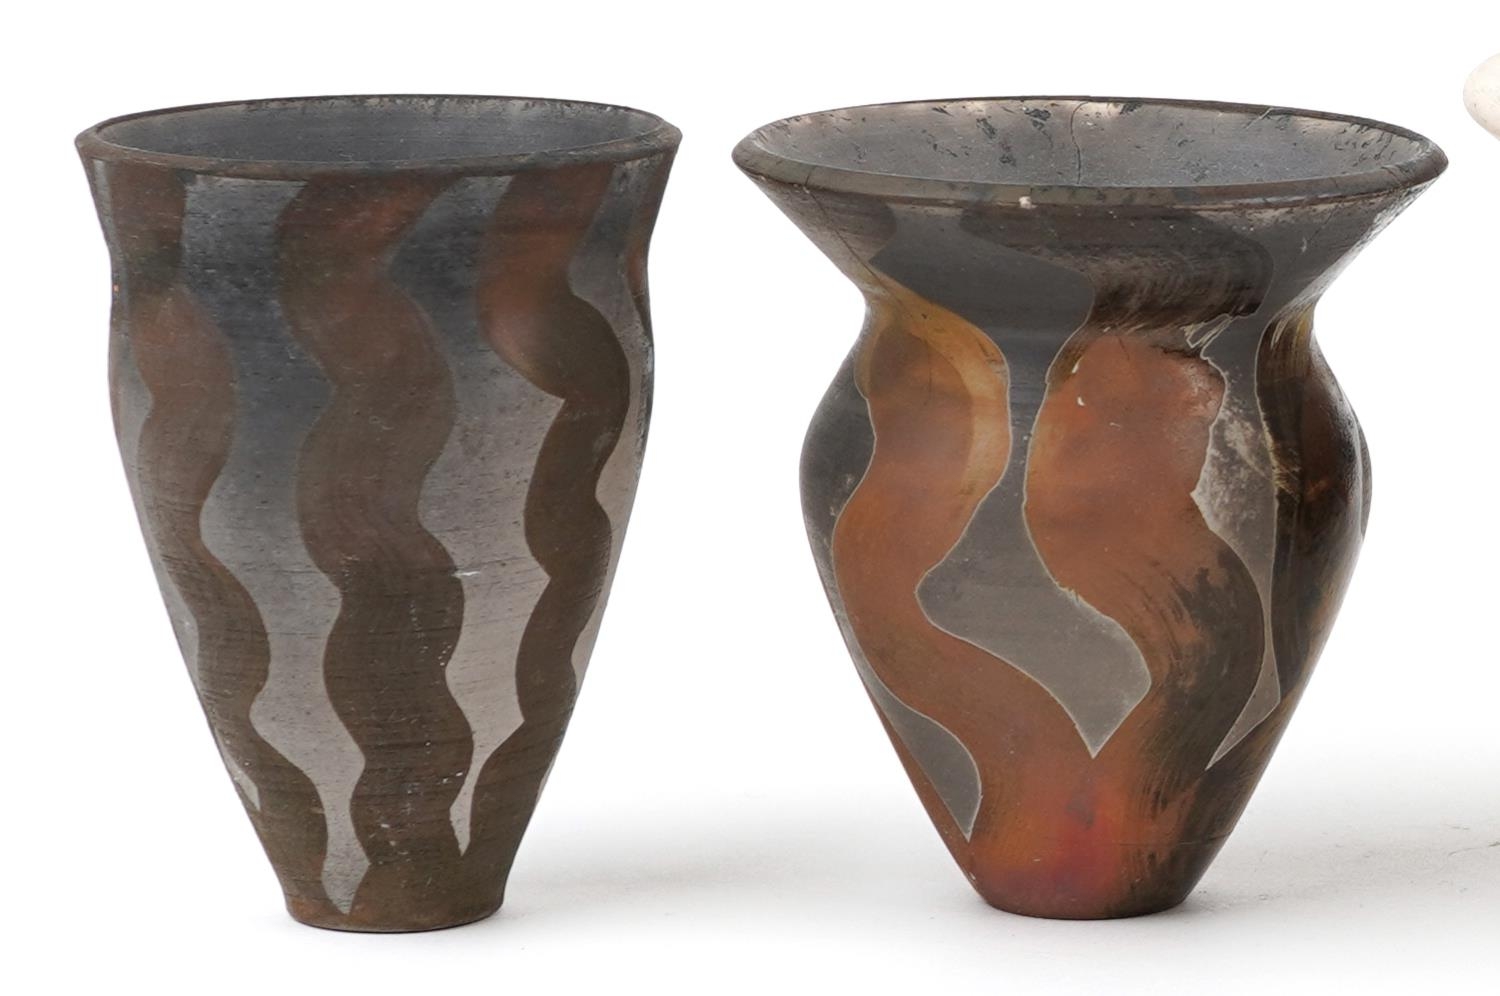 Contemporary raku glazed studio pottery including a centre bowl and two vases having an abstract - Image 2 of 7